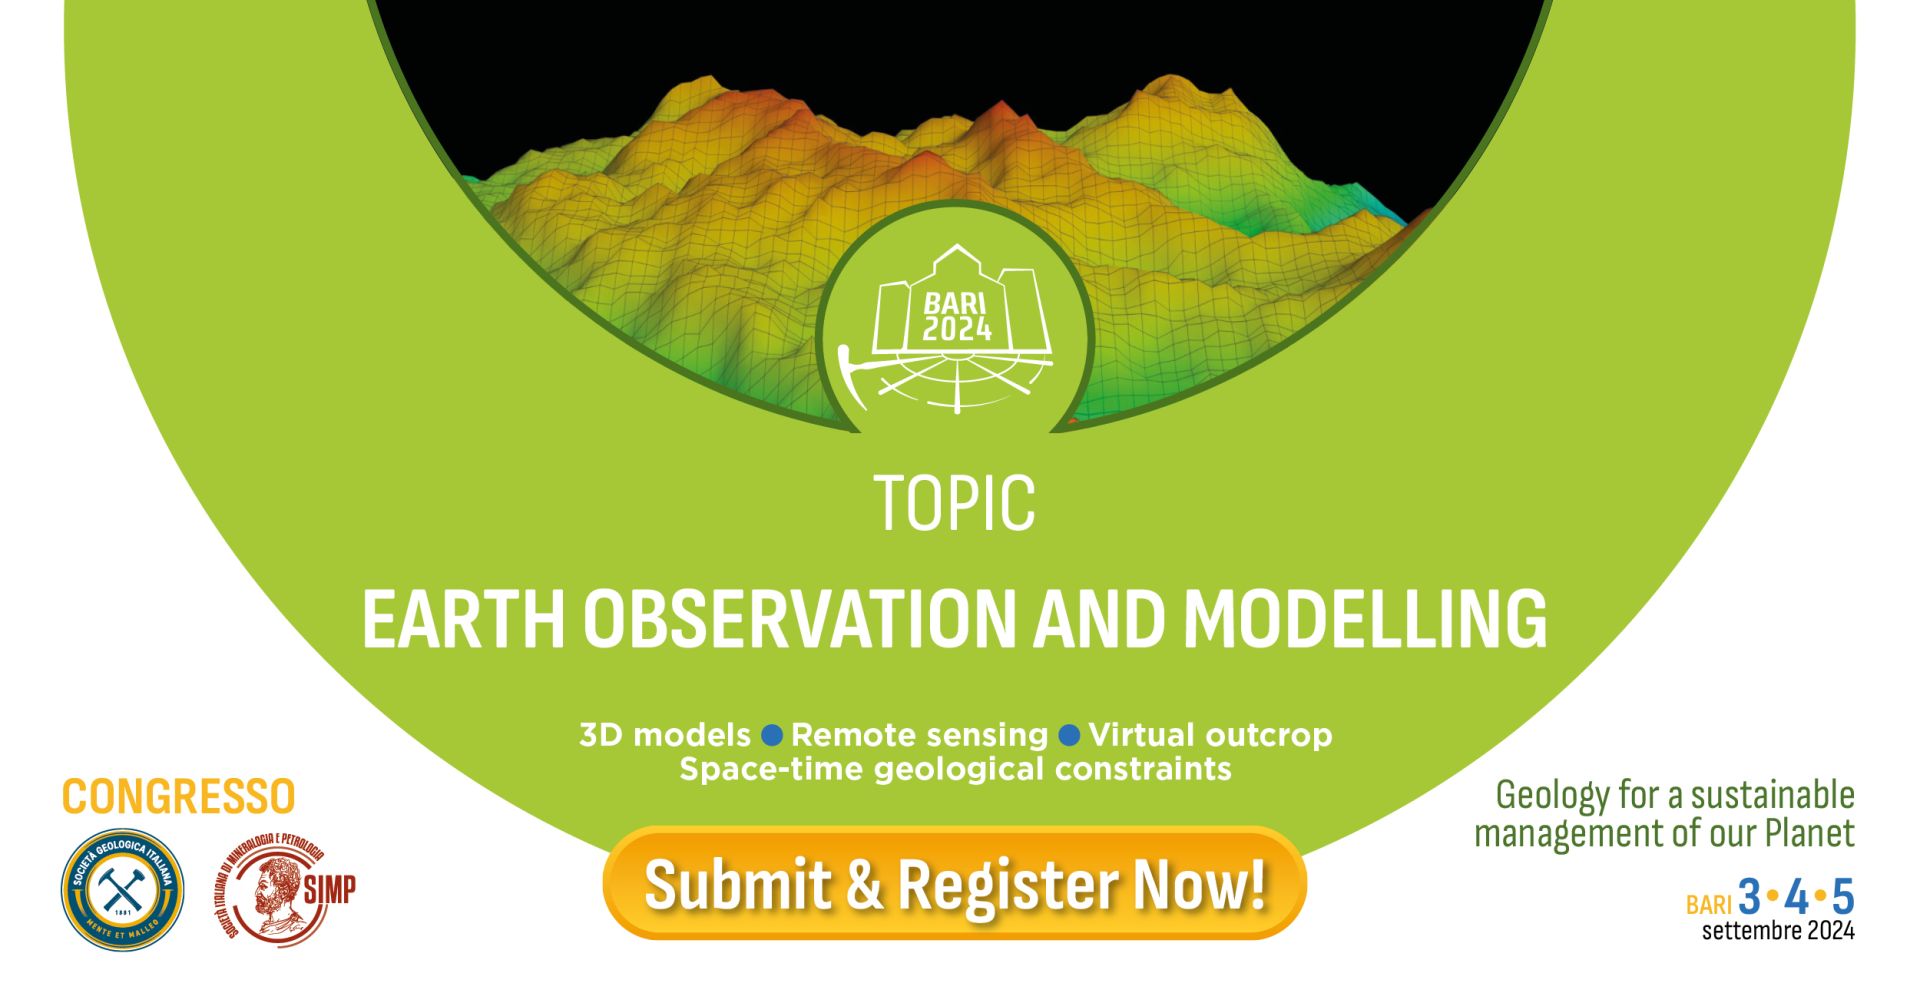 Earth observation and modelling